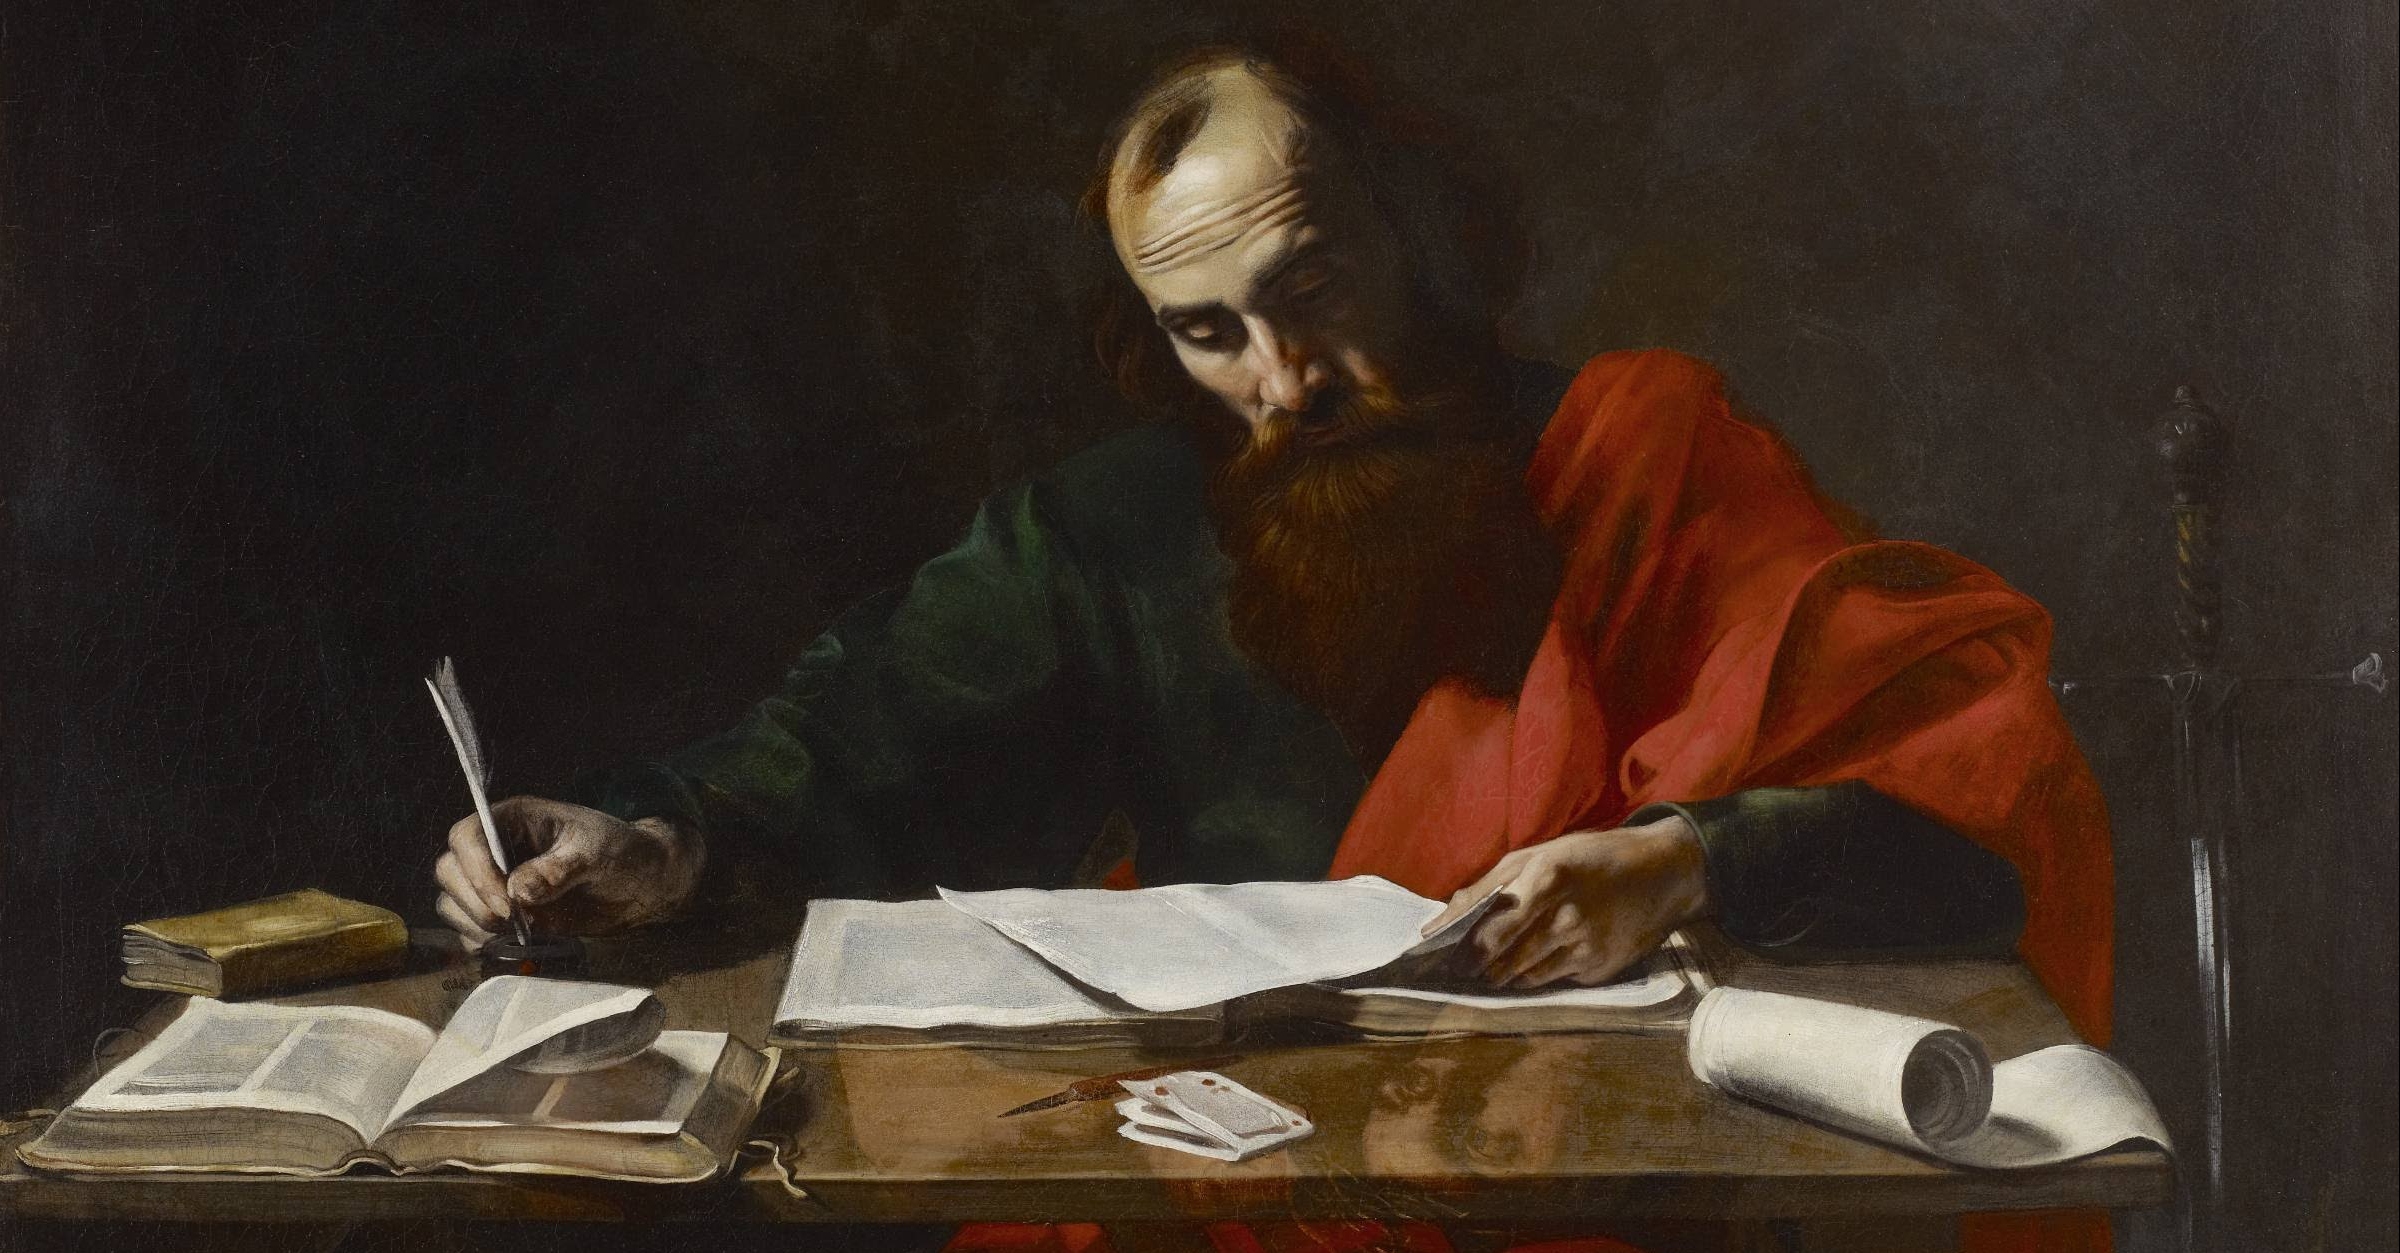 Painting of the Apostle Paul